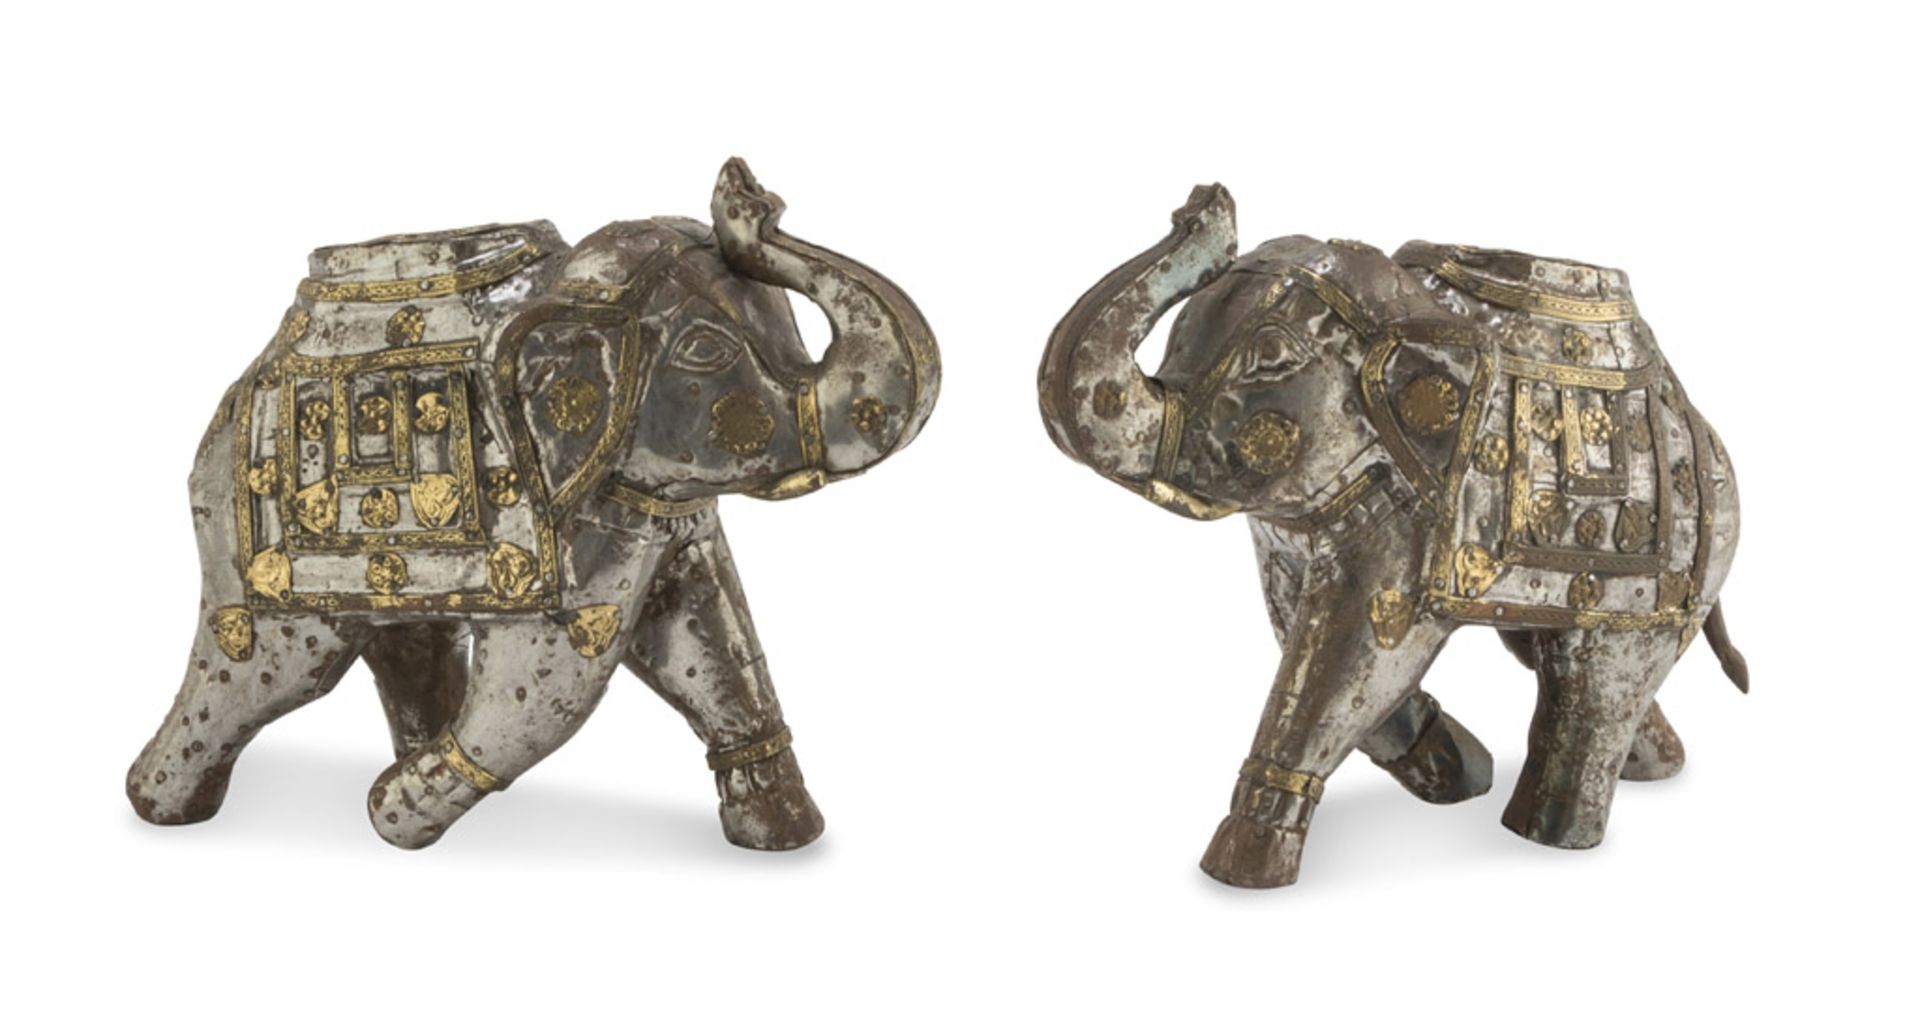 A PAIR OF METAL-COATED WOODEN SCULPTURES, INDIA 20TH CENTURY representing two elephants with